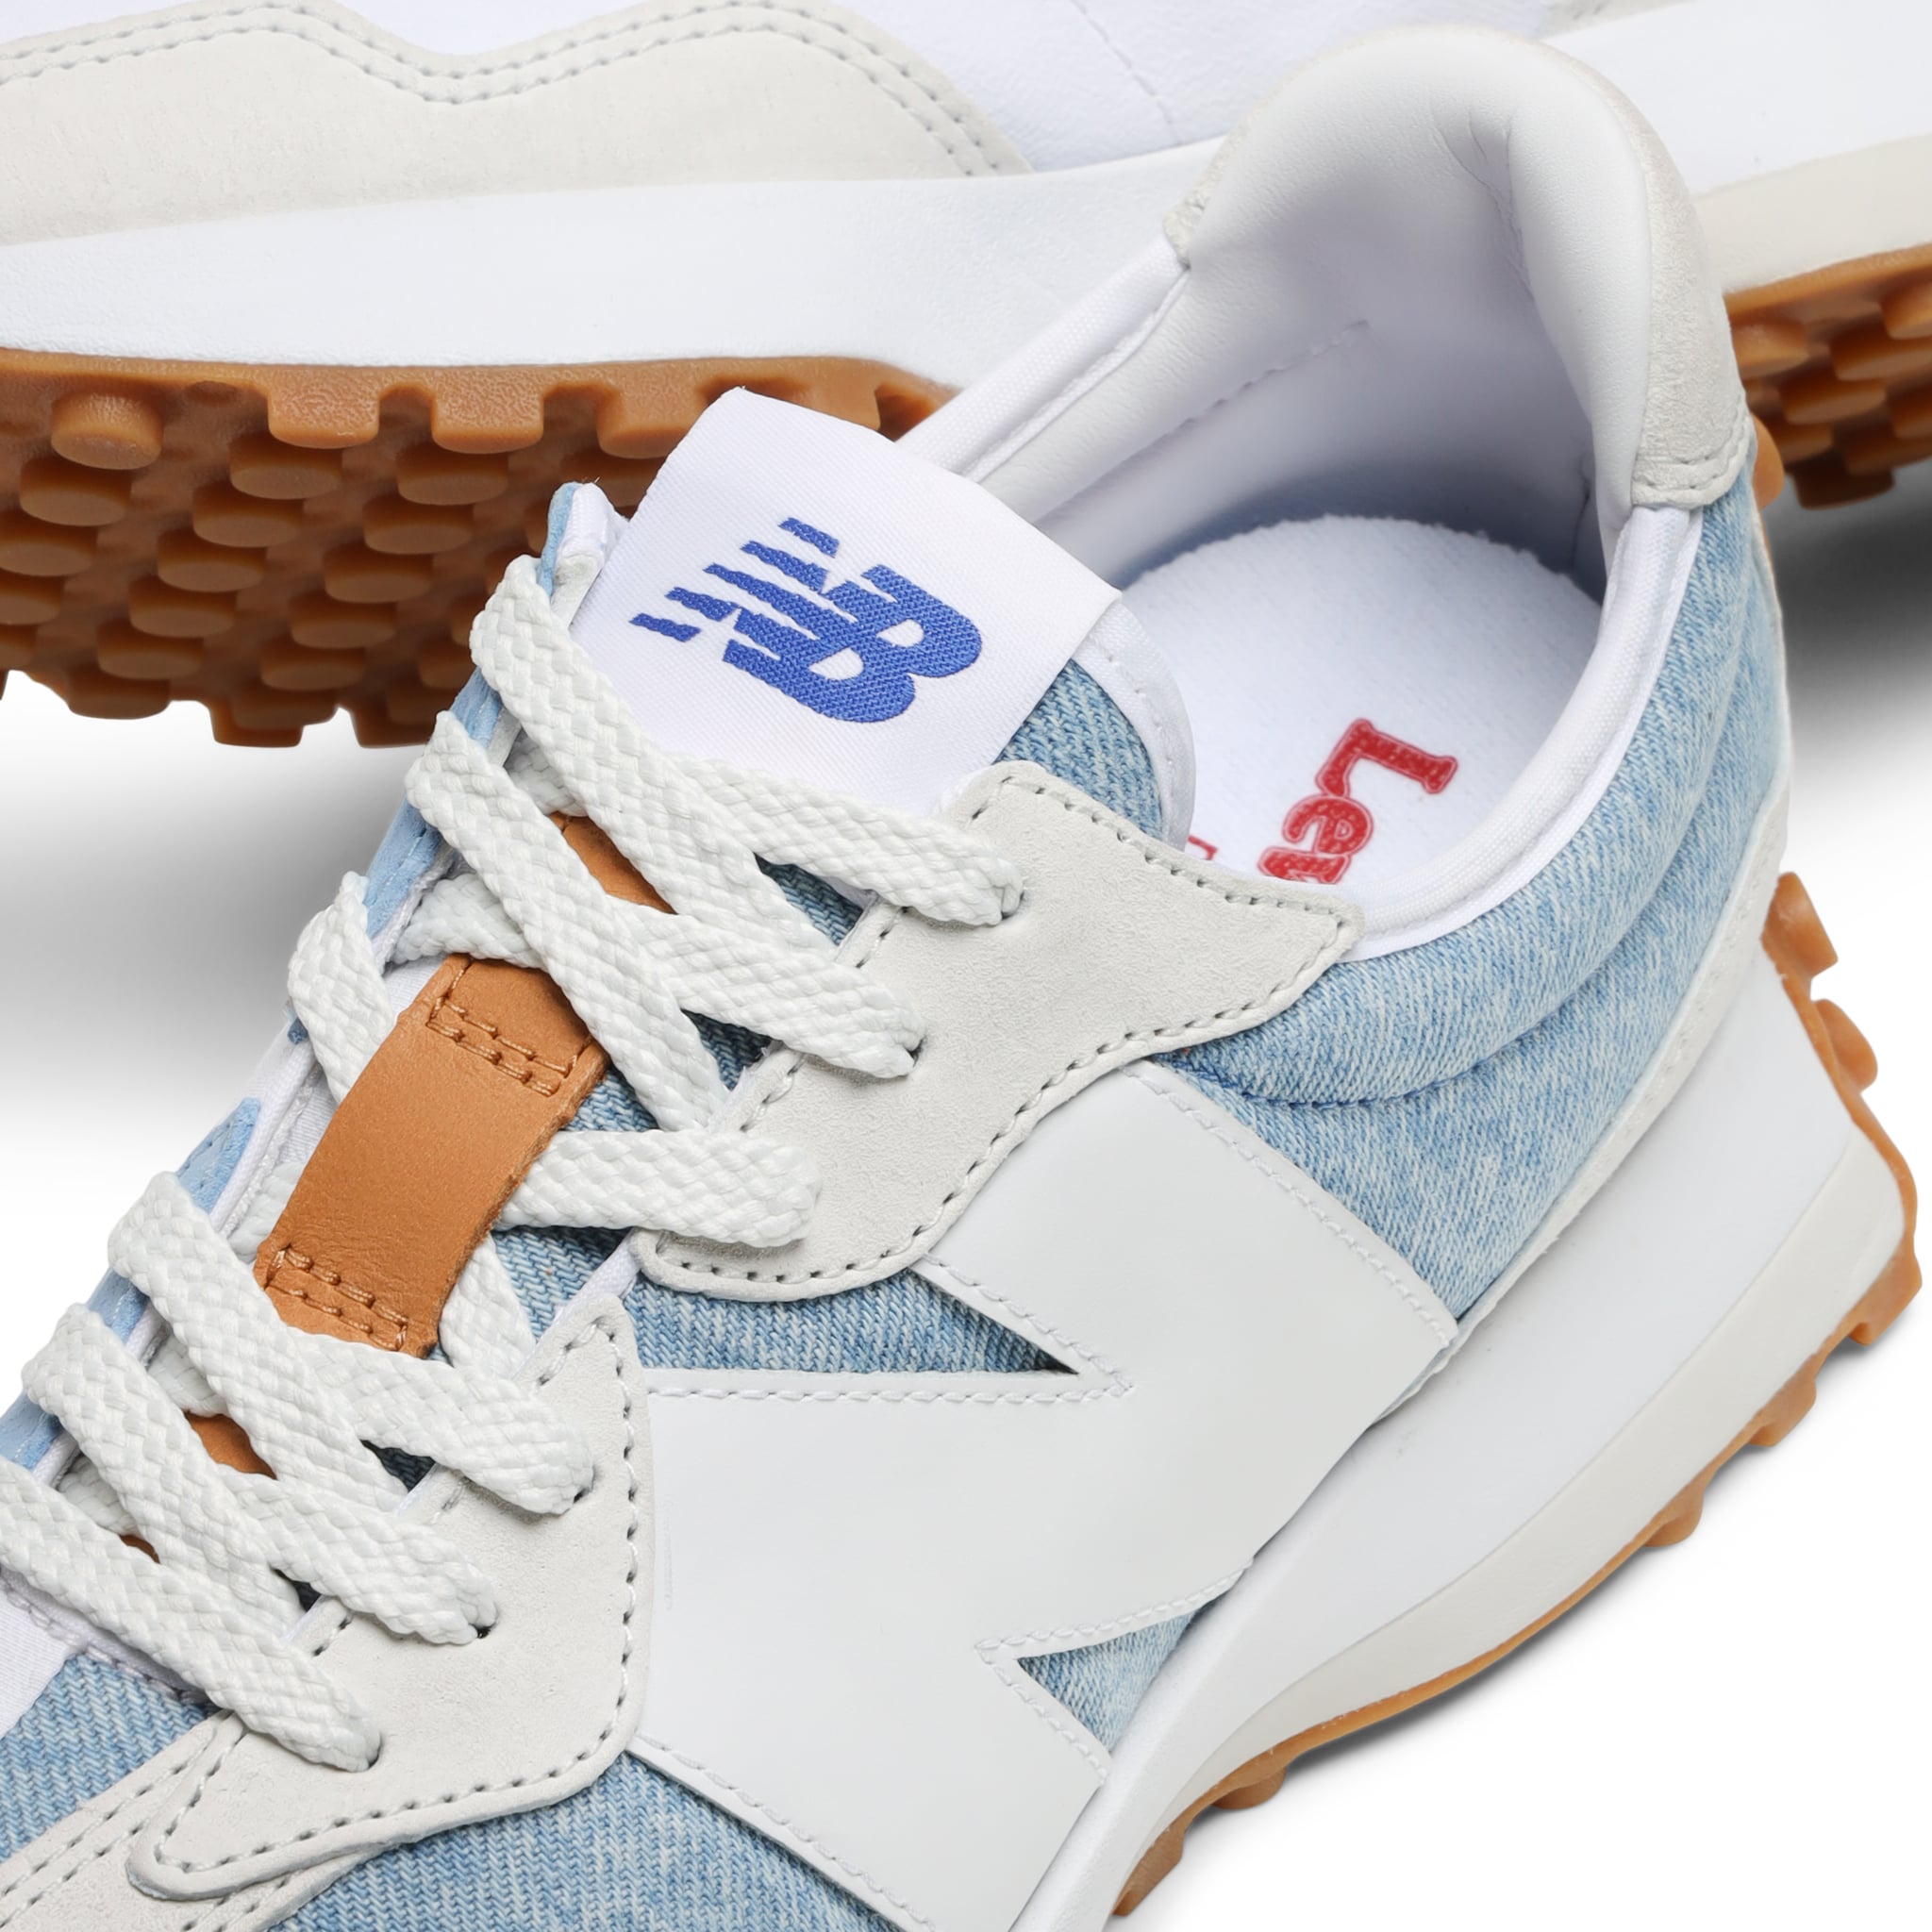 new balance sneakers with jeans